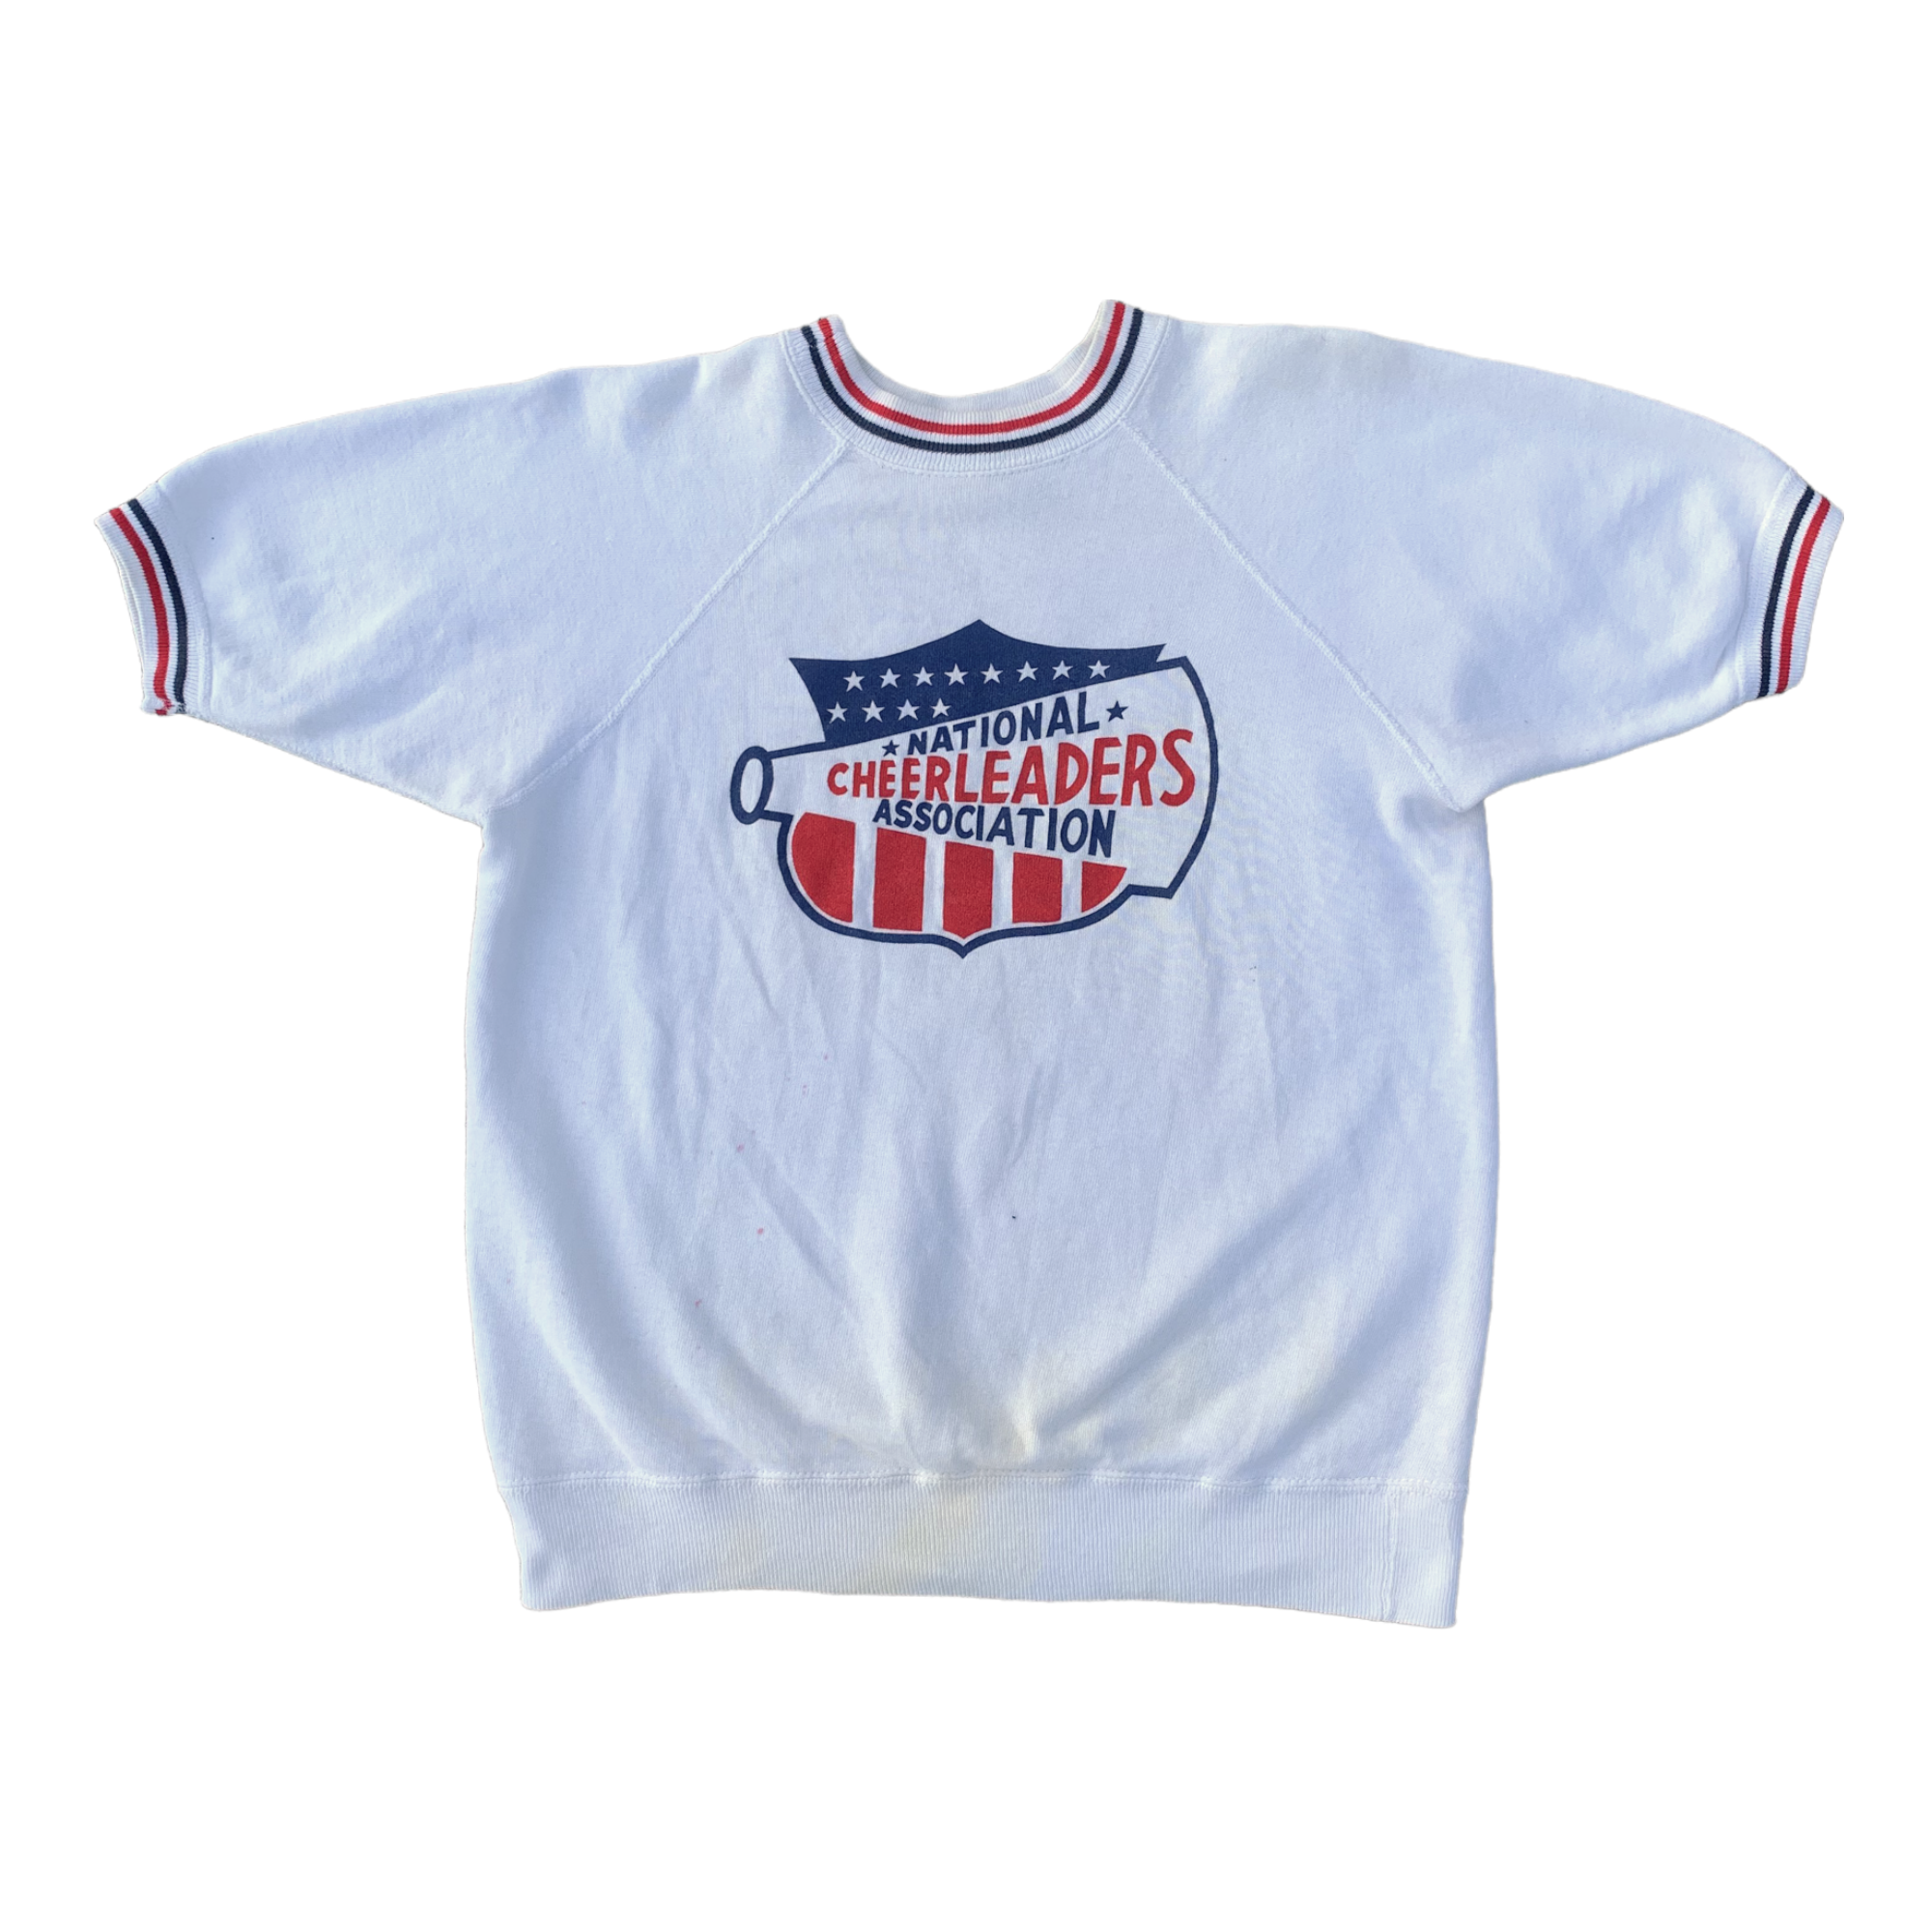 1960s Cheerleader Short-Sleeve Crewneck with Tricolor Cuffs - White, Red & Blue - S